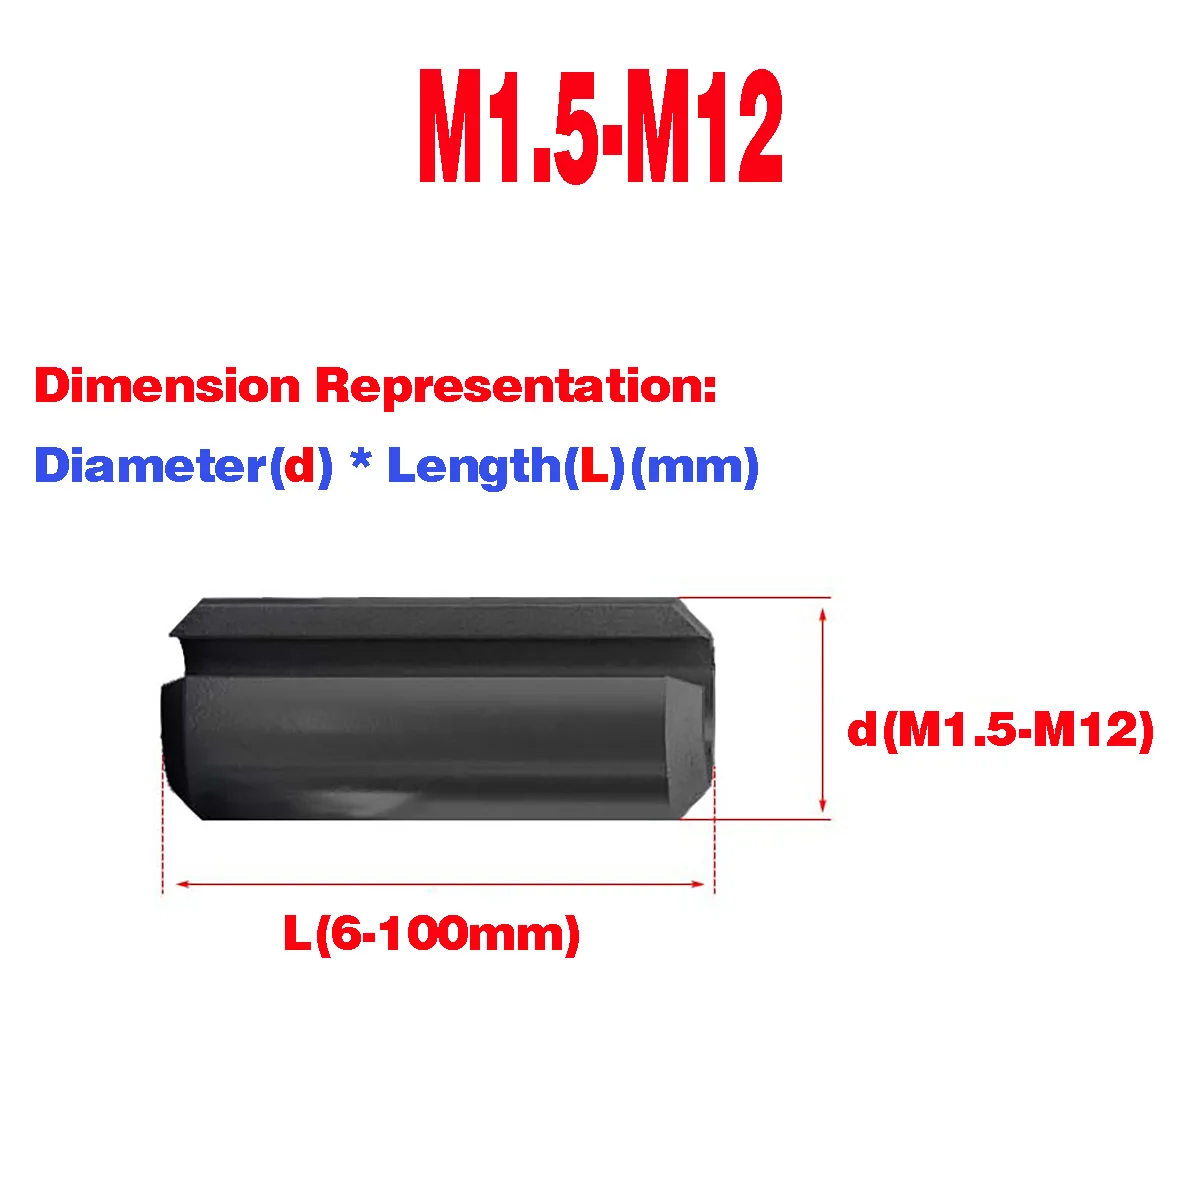 

Black 65 Manganese Steel Elastic Open Cylindrical Locating Pin / Hollow Pin M1.5-M12